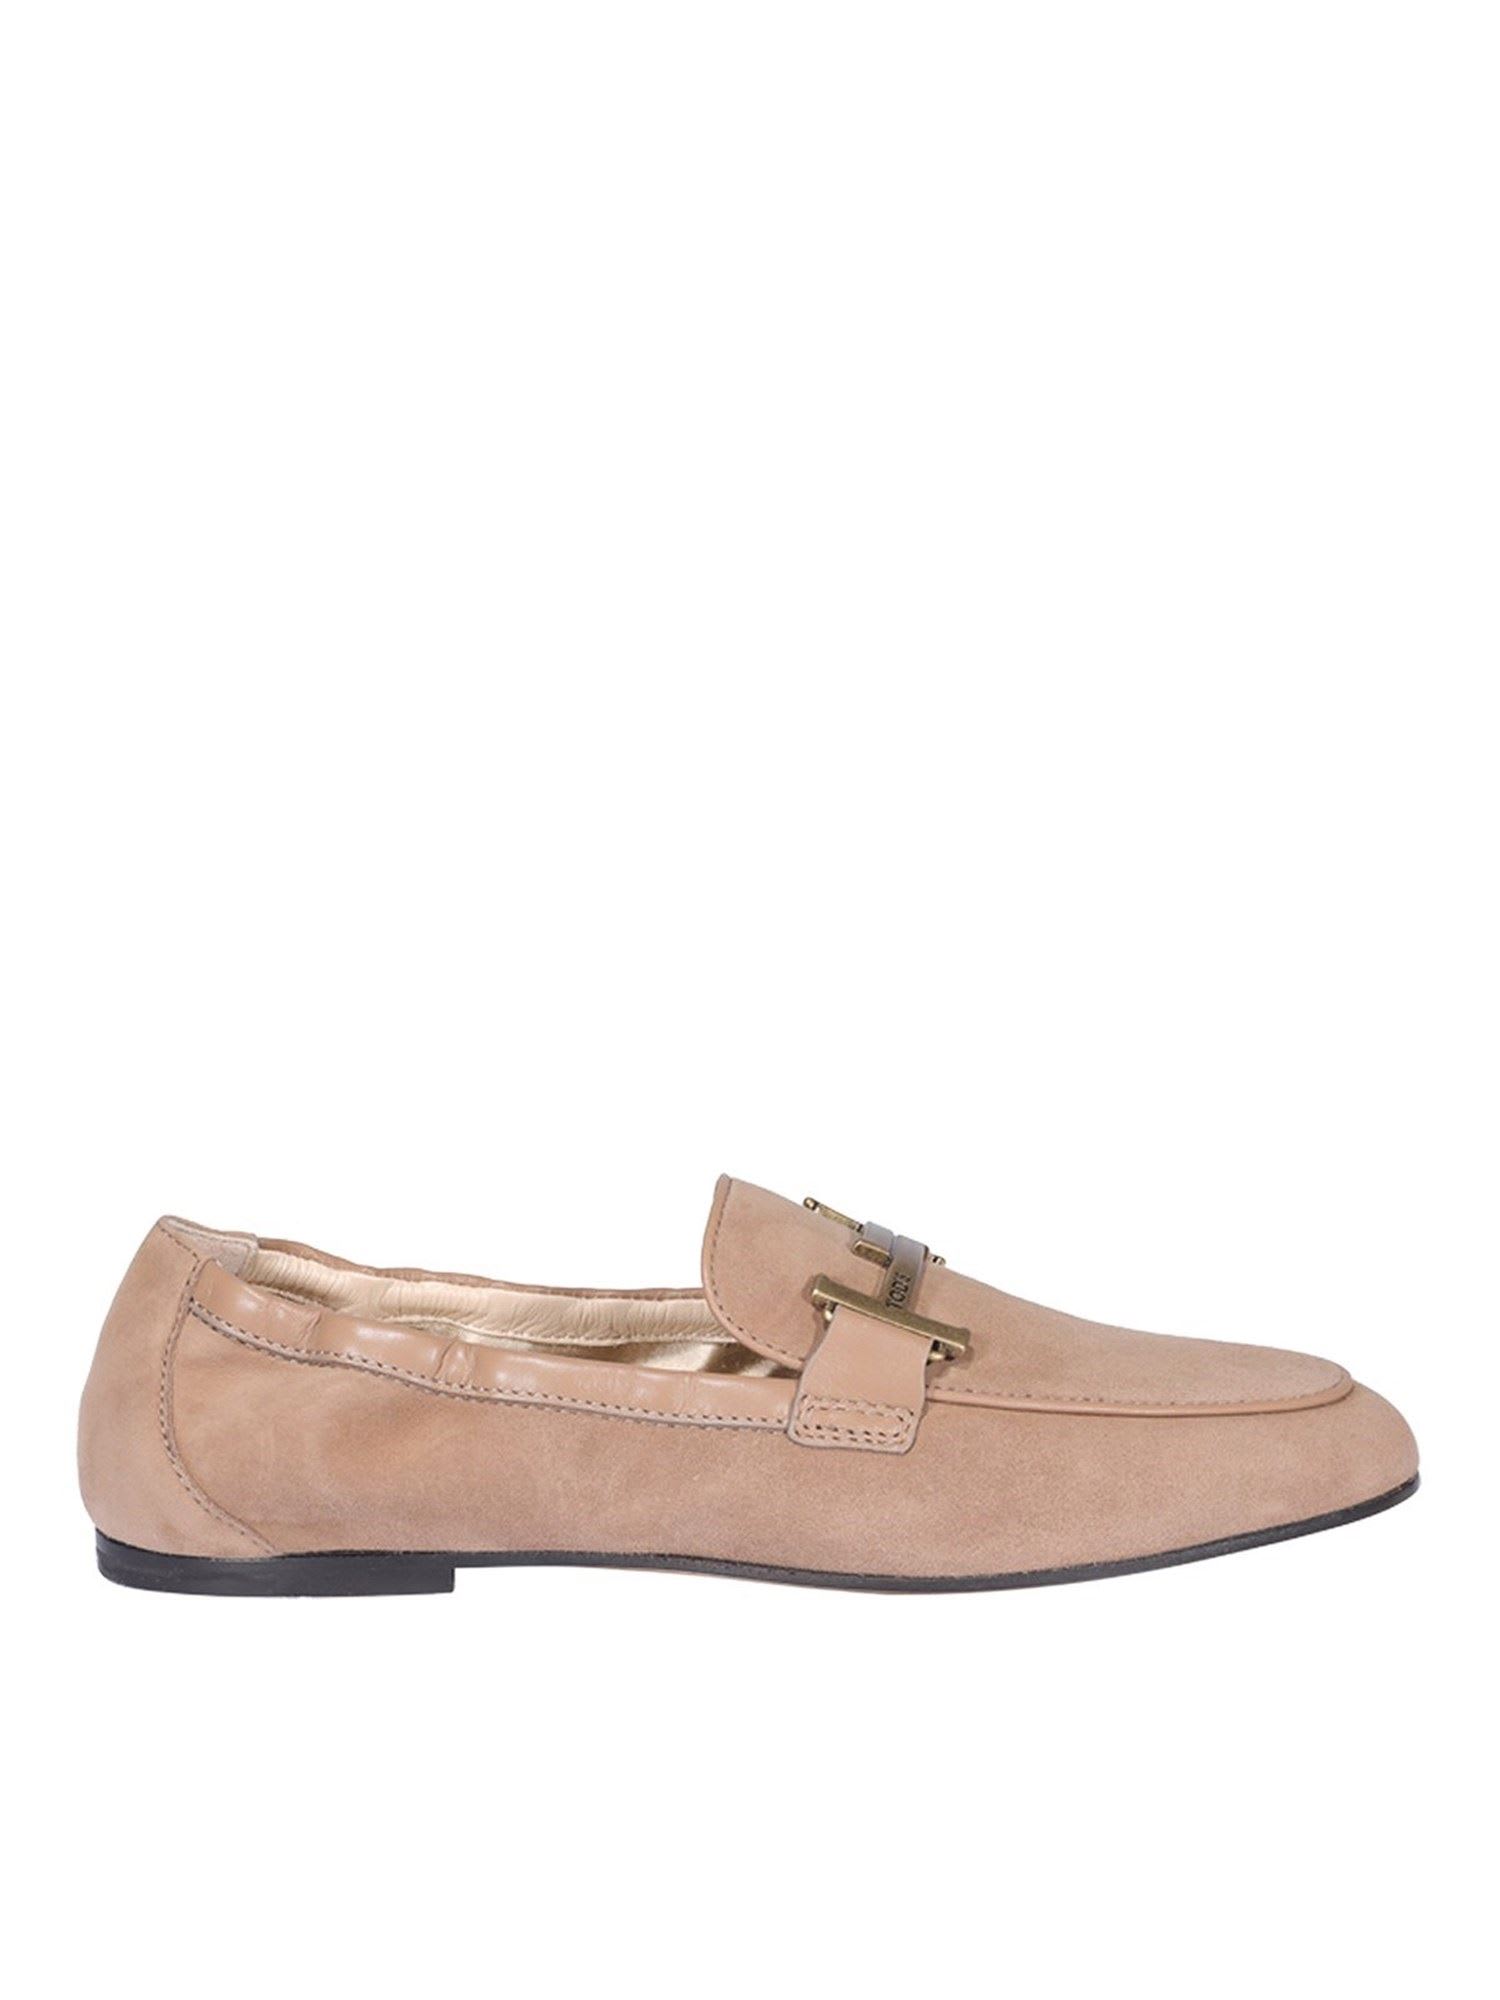 Tods Double T Loafers